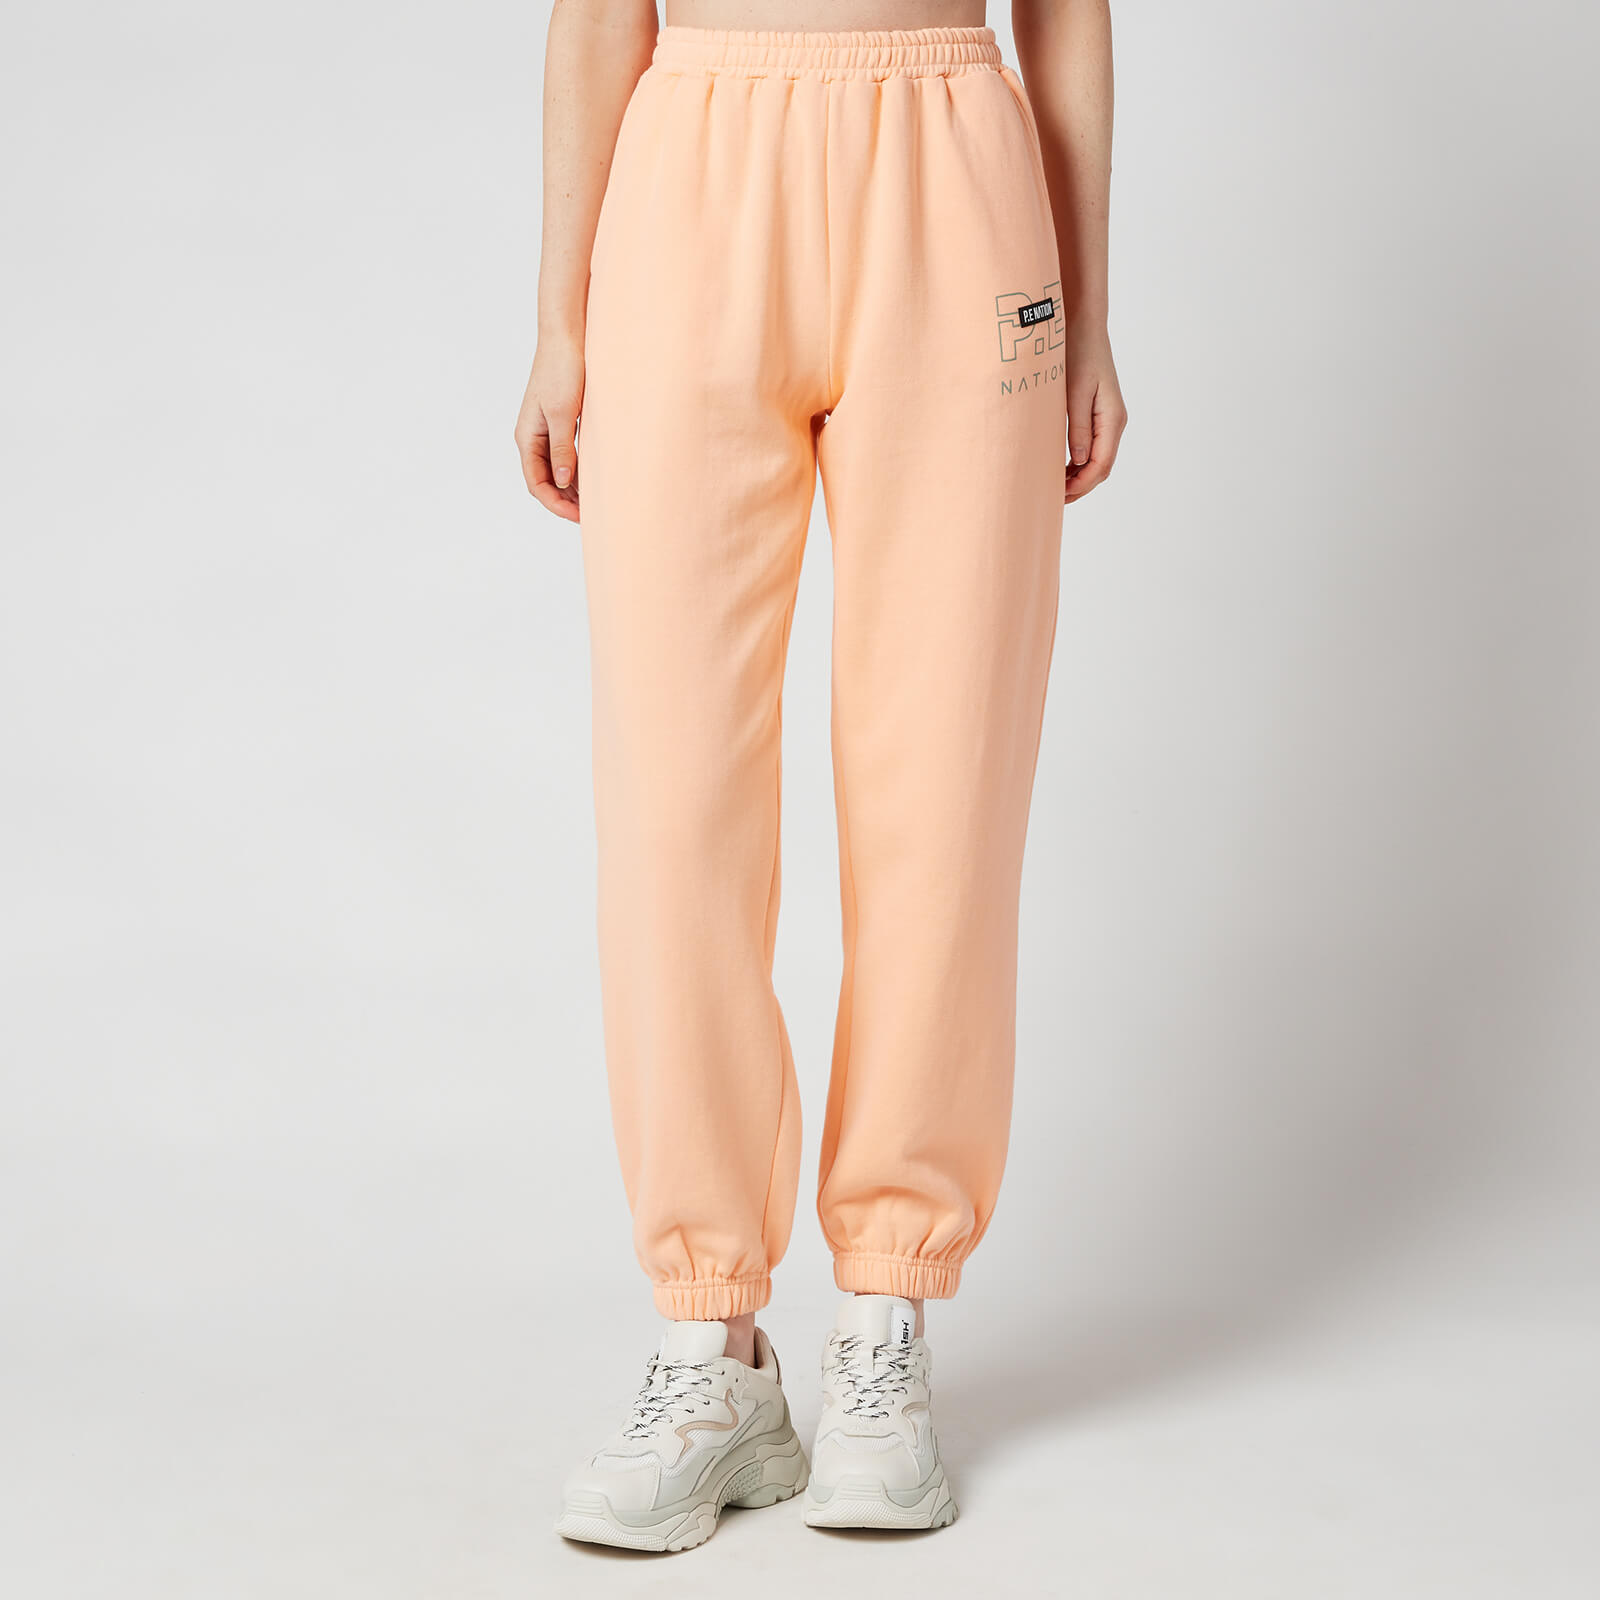 P.E Nation Women's Grand Stand Track Pants - Pastel Peach - XS